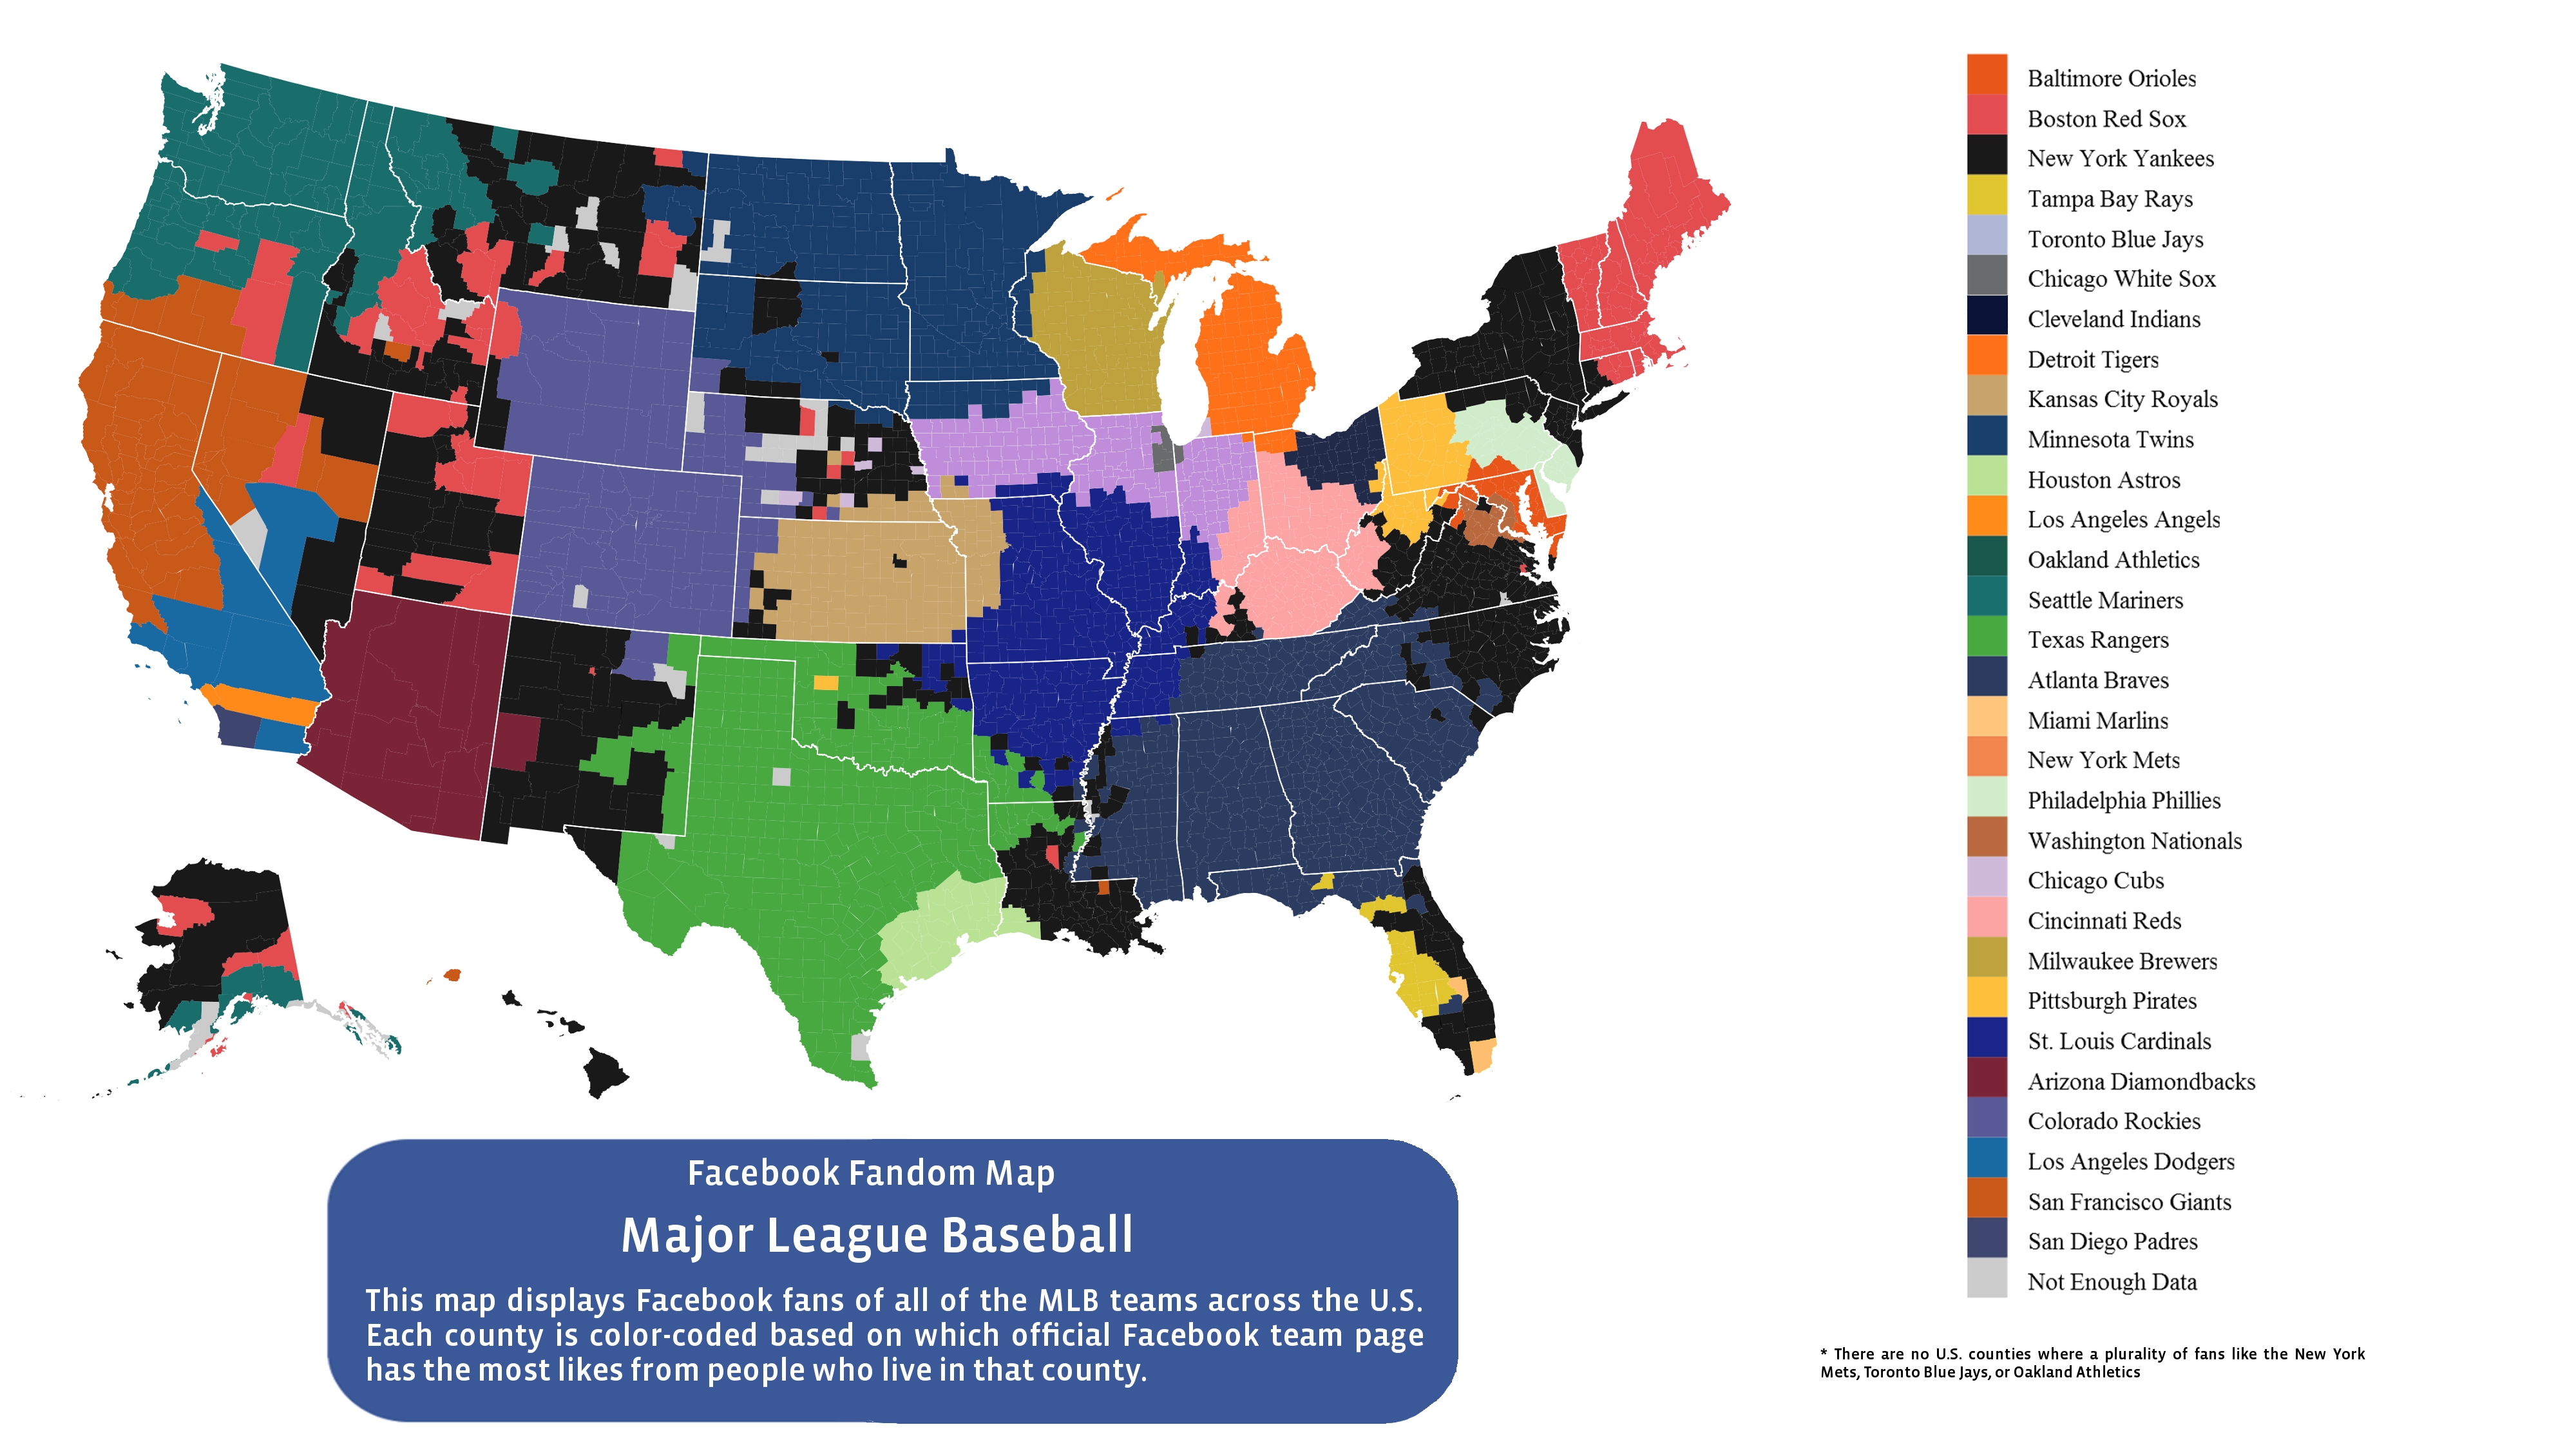 This Map Reveals America's Favorite Sports by State